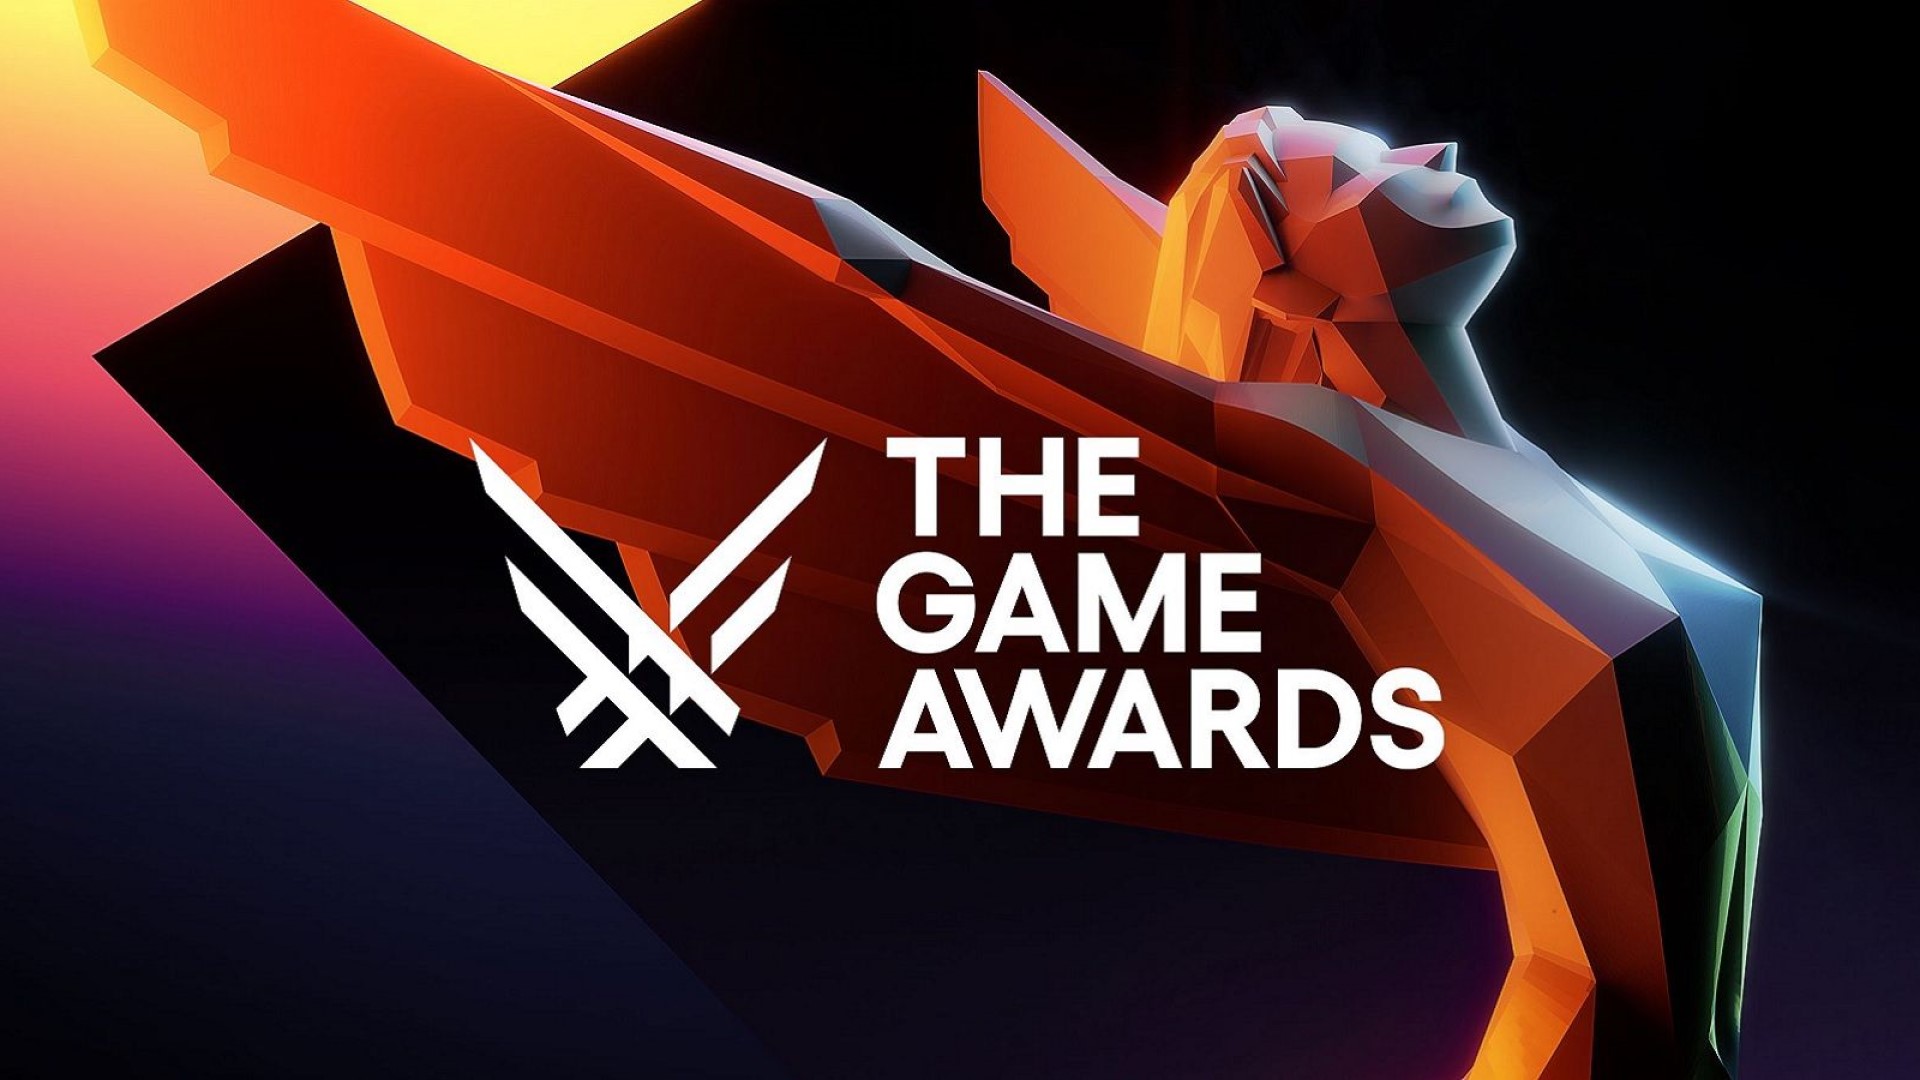 The Game Awards 2021: Best Action/Adventure Game Winner